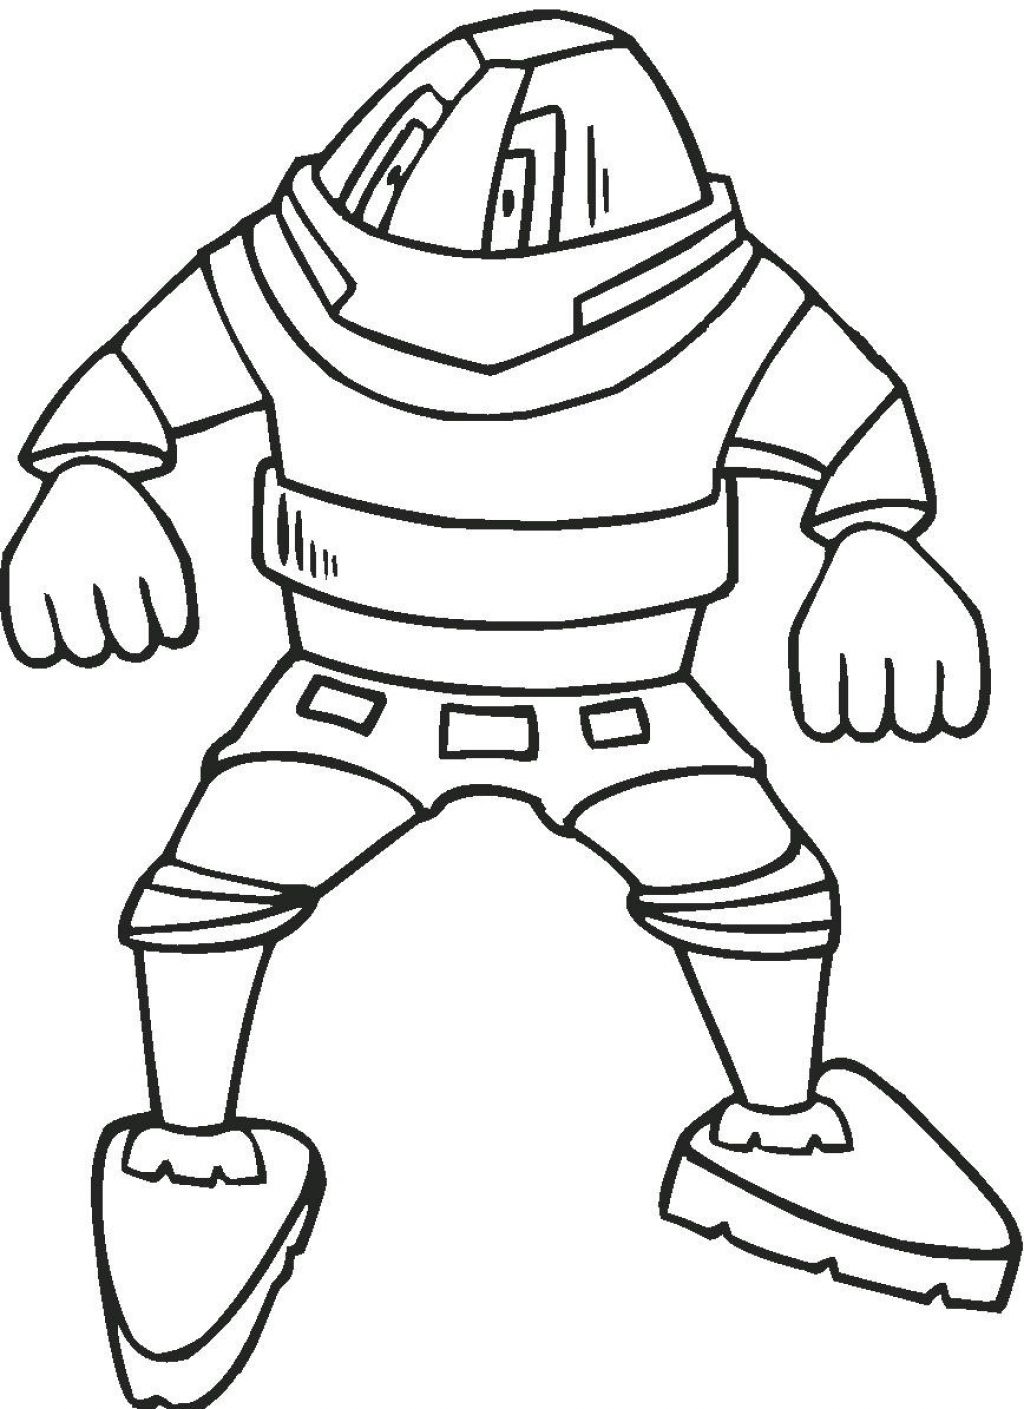 Printable Robot Coloring Pages